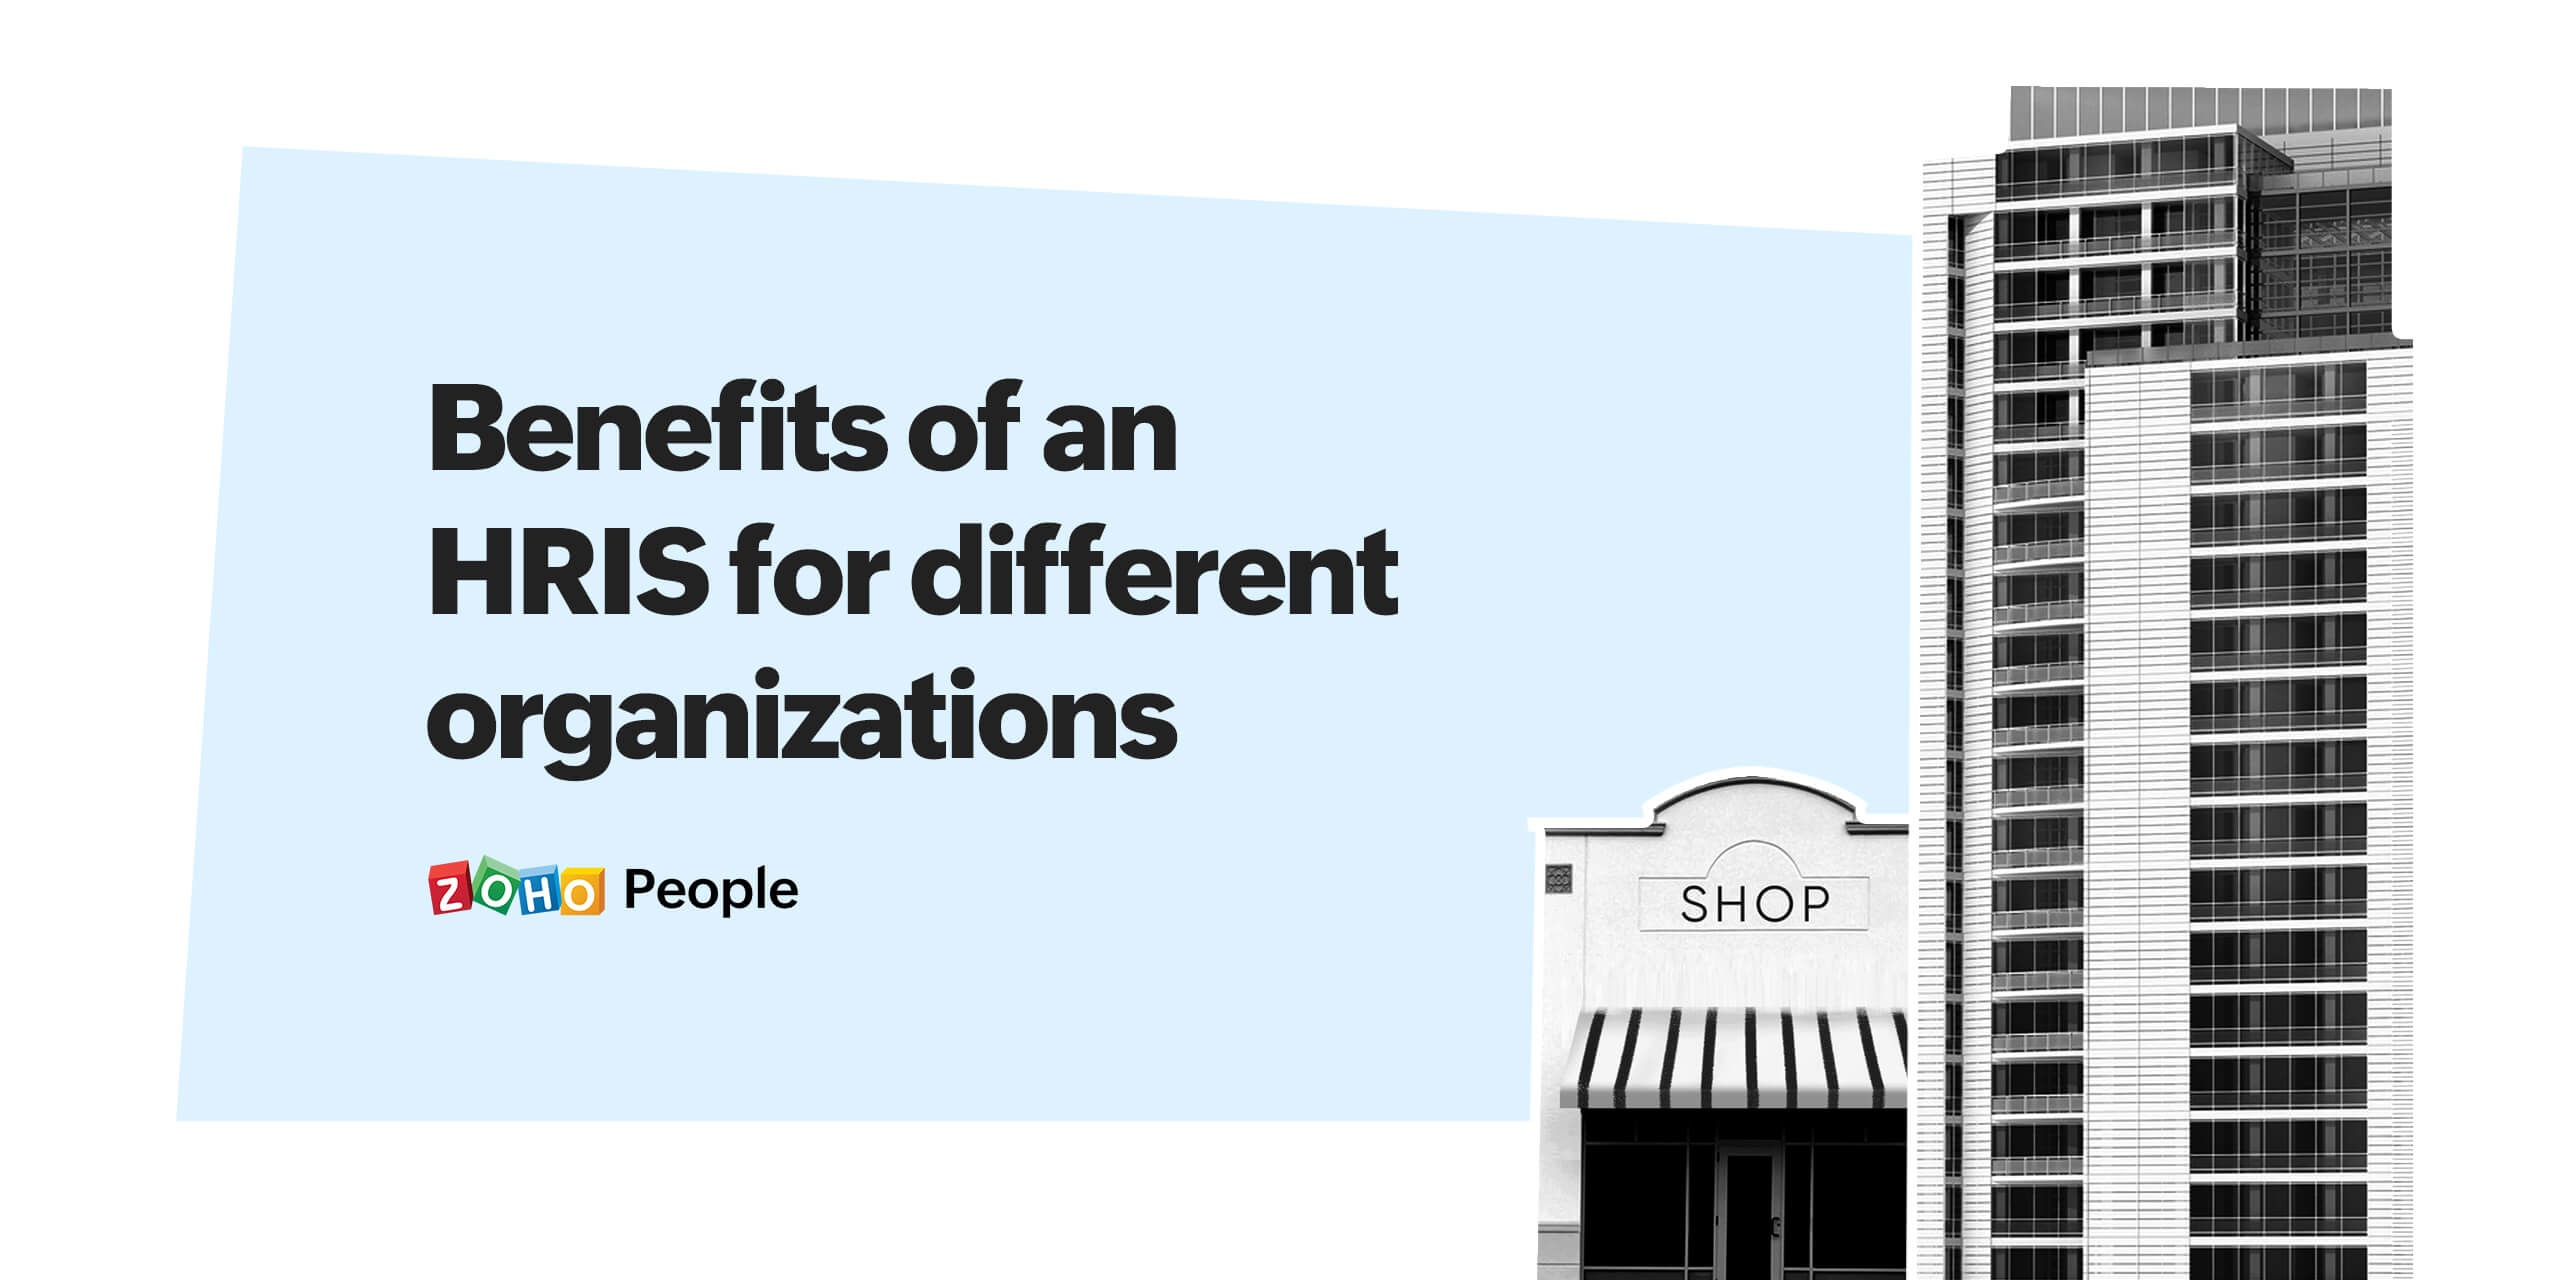 Benefits of HRIS for different organizations